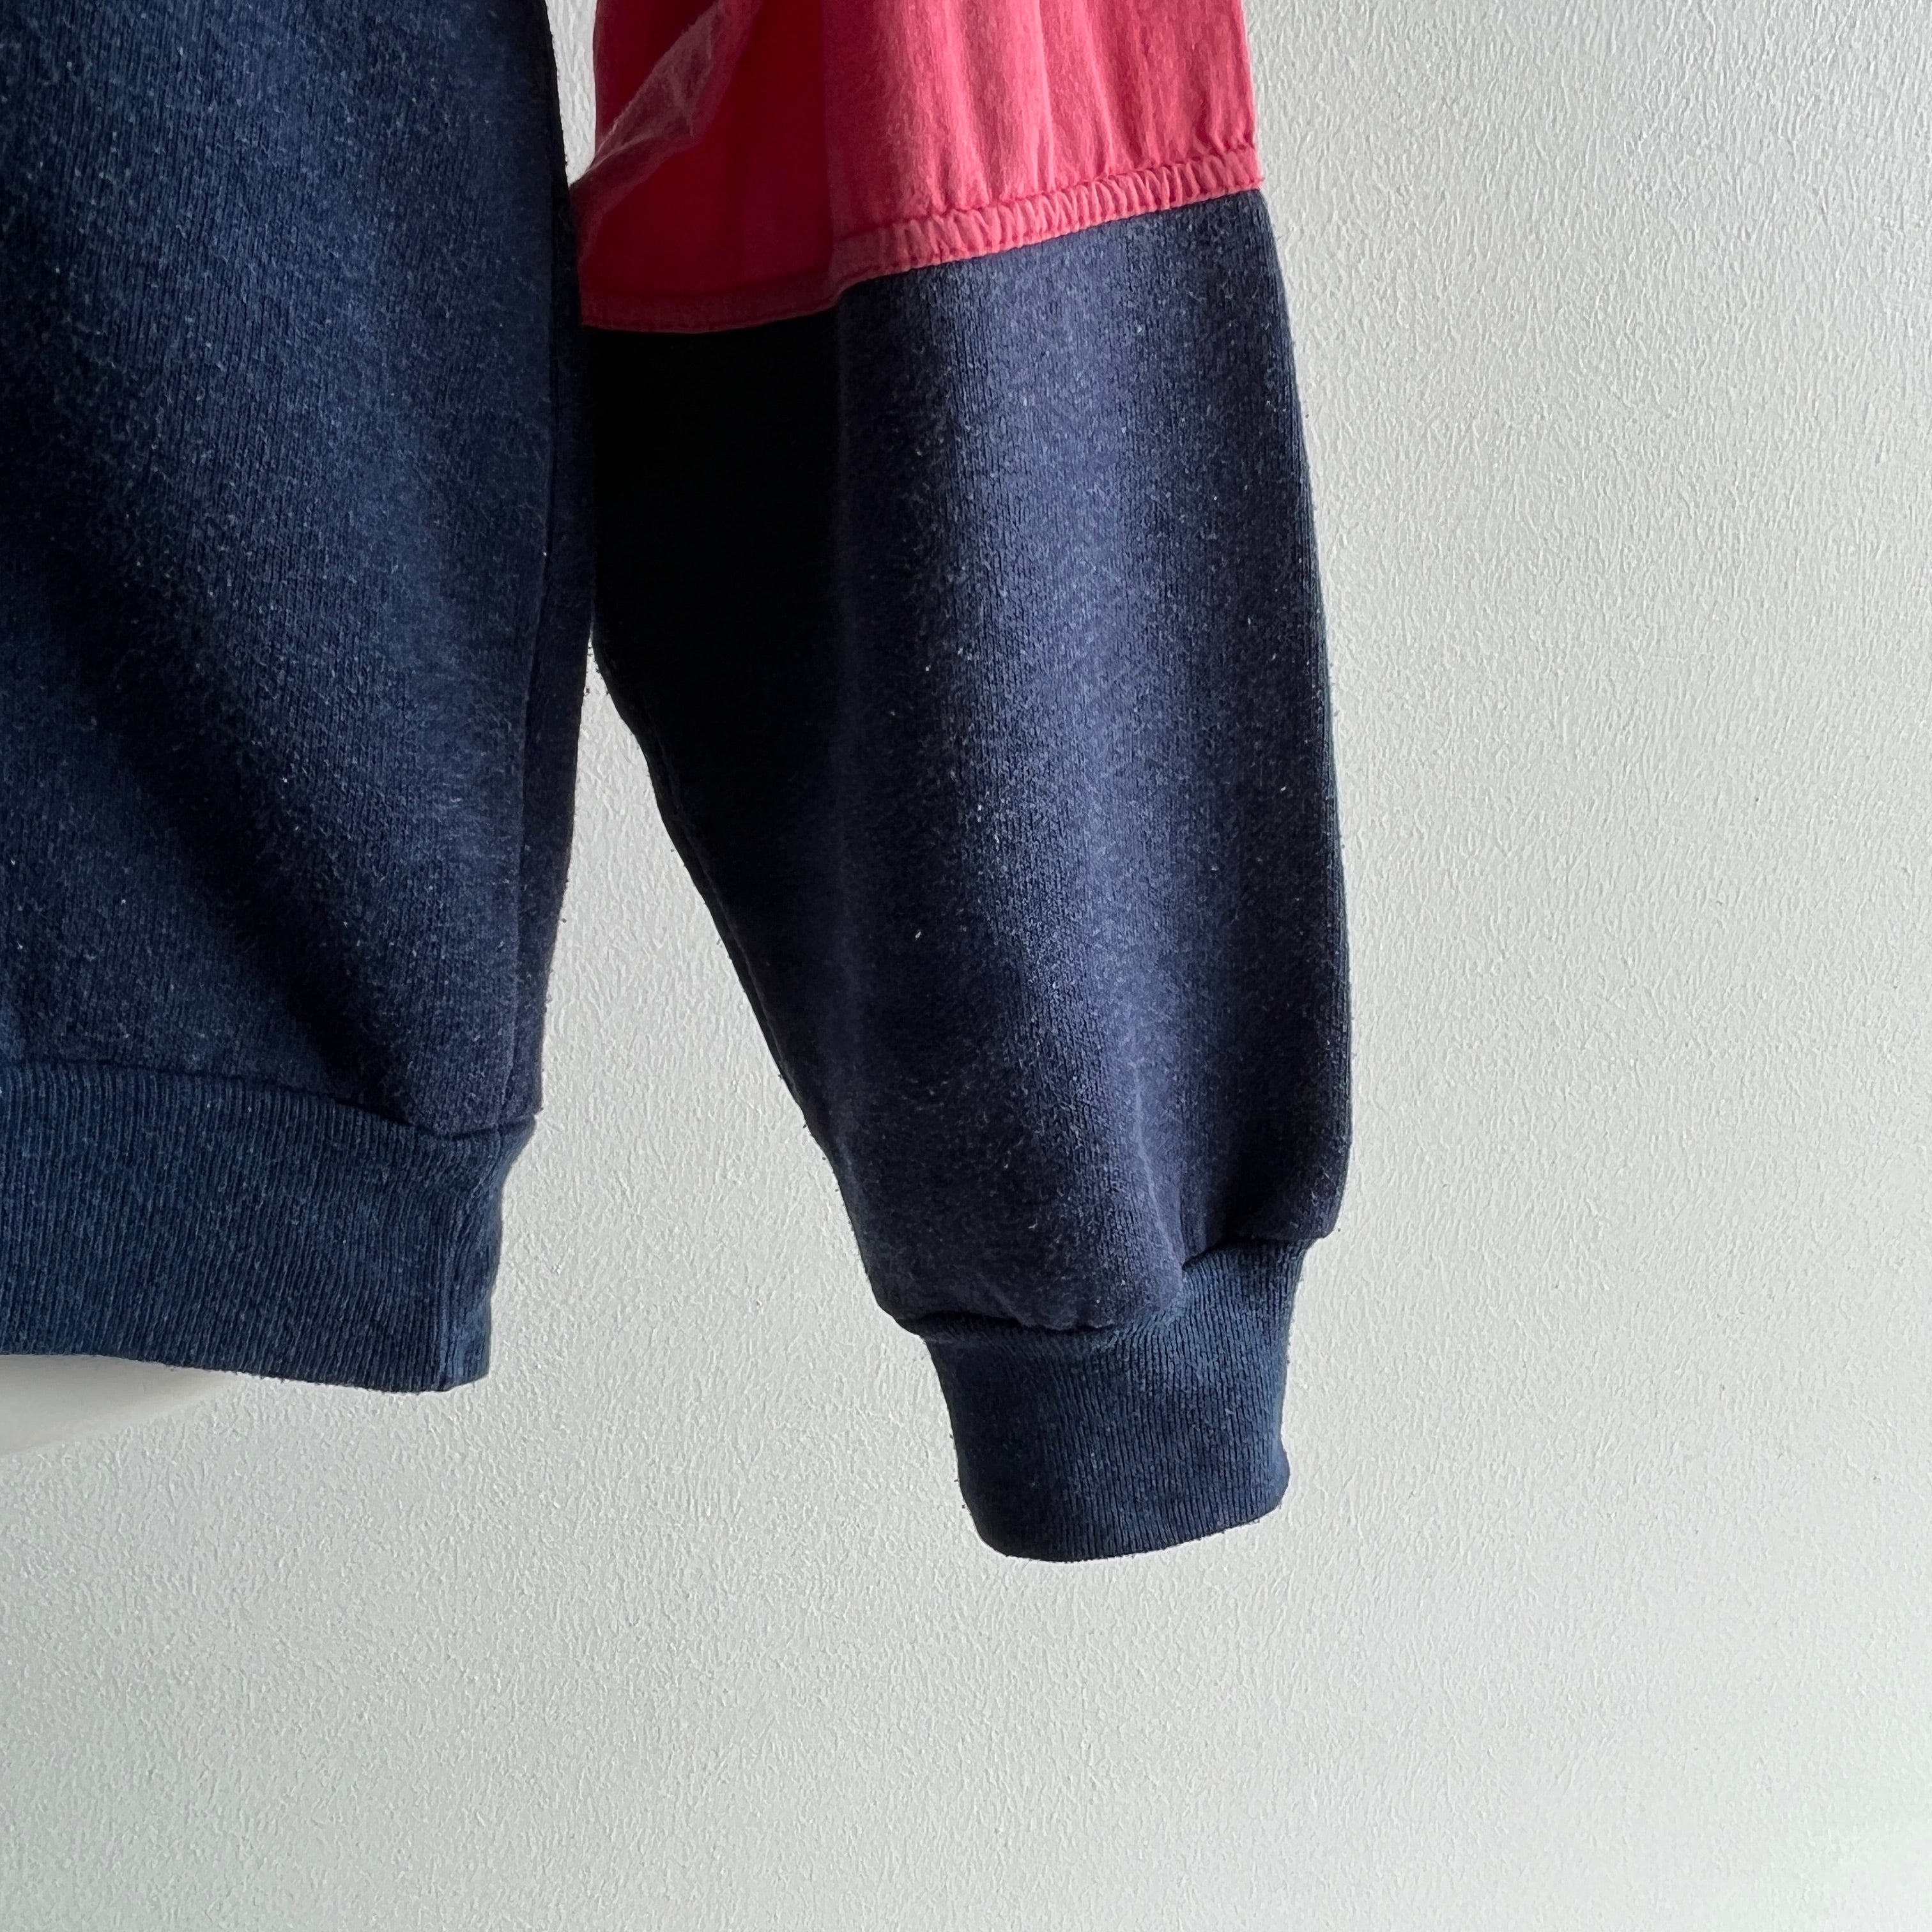 1980s Awesome Color Block Polo Sweatshirt - Swoon